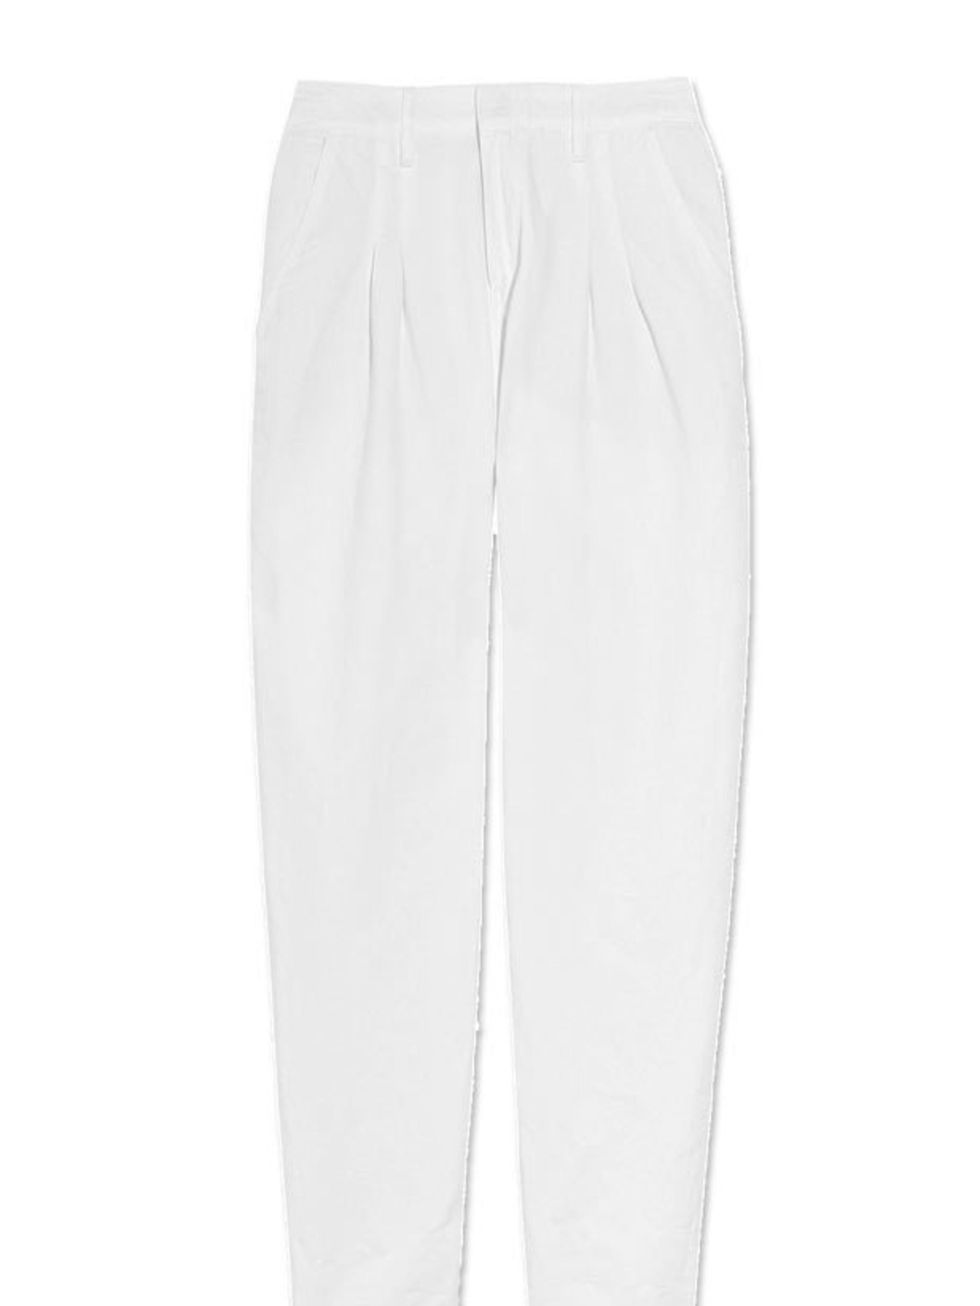 <p>Levi's Made &amp; Crafted cropped chinos, £145, at <a href="http://www.net-a-porter.com/product/112577">Net-a-Porter</a></p>